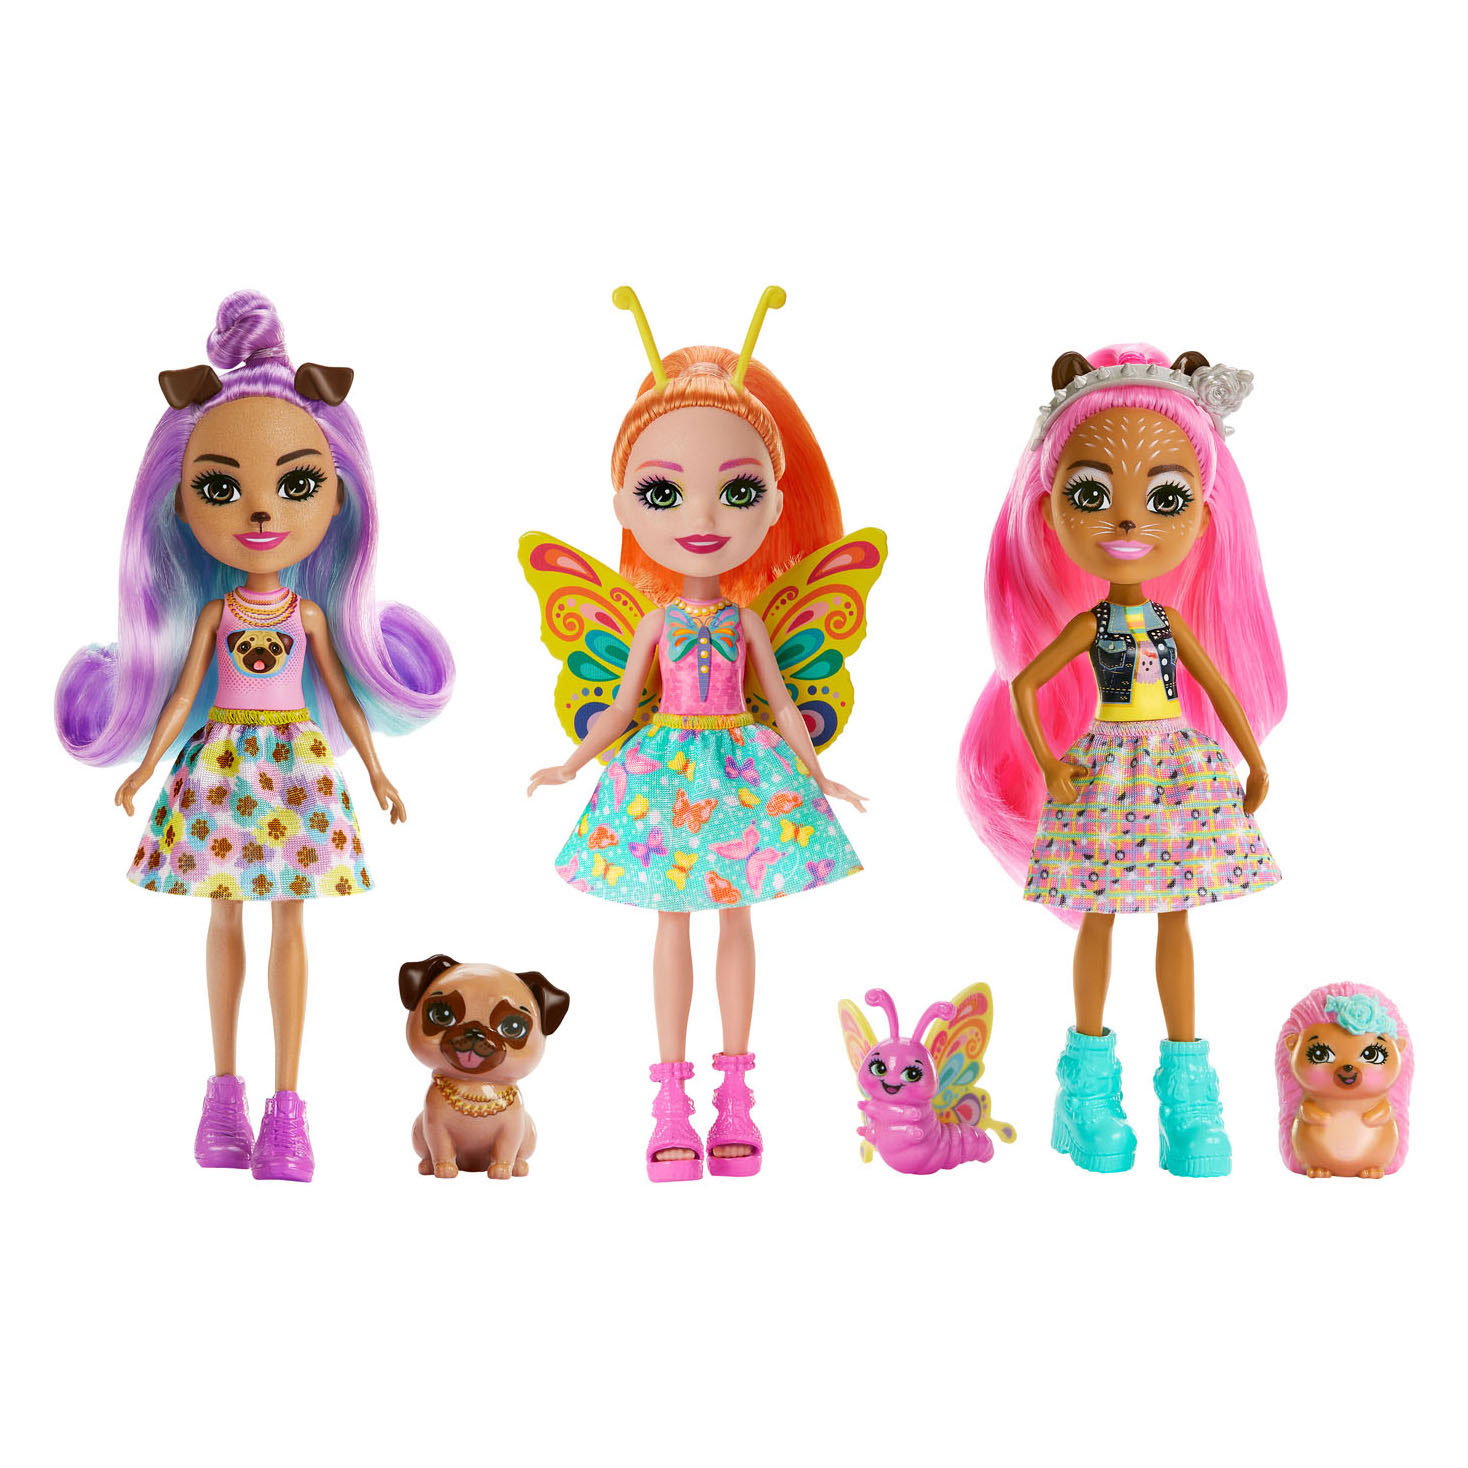 Enchantimals Dolls, City Tails Penna Pug Doll and Trusty Animal Friend,  Small Doll with Removable Skirt and Accessories, Gifts for Kids, HKN11